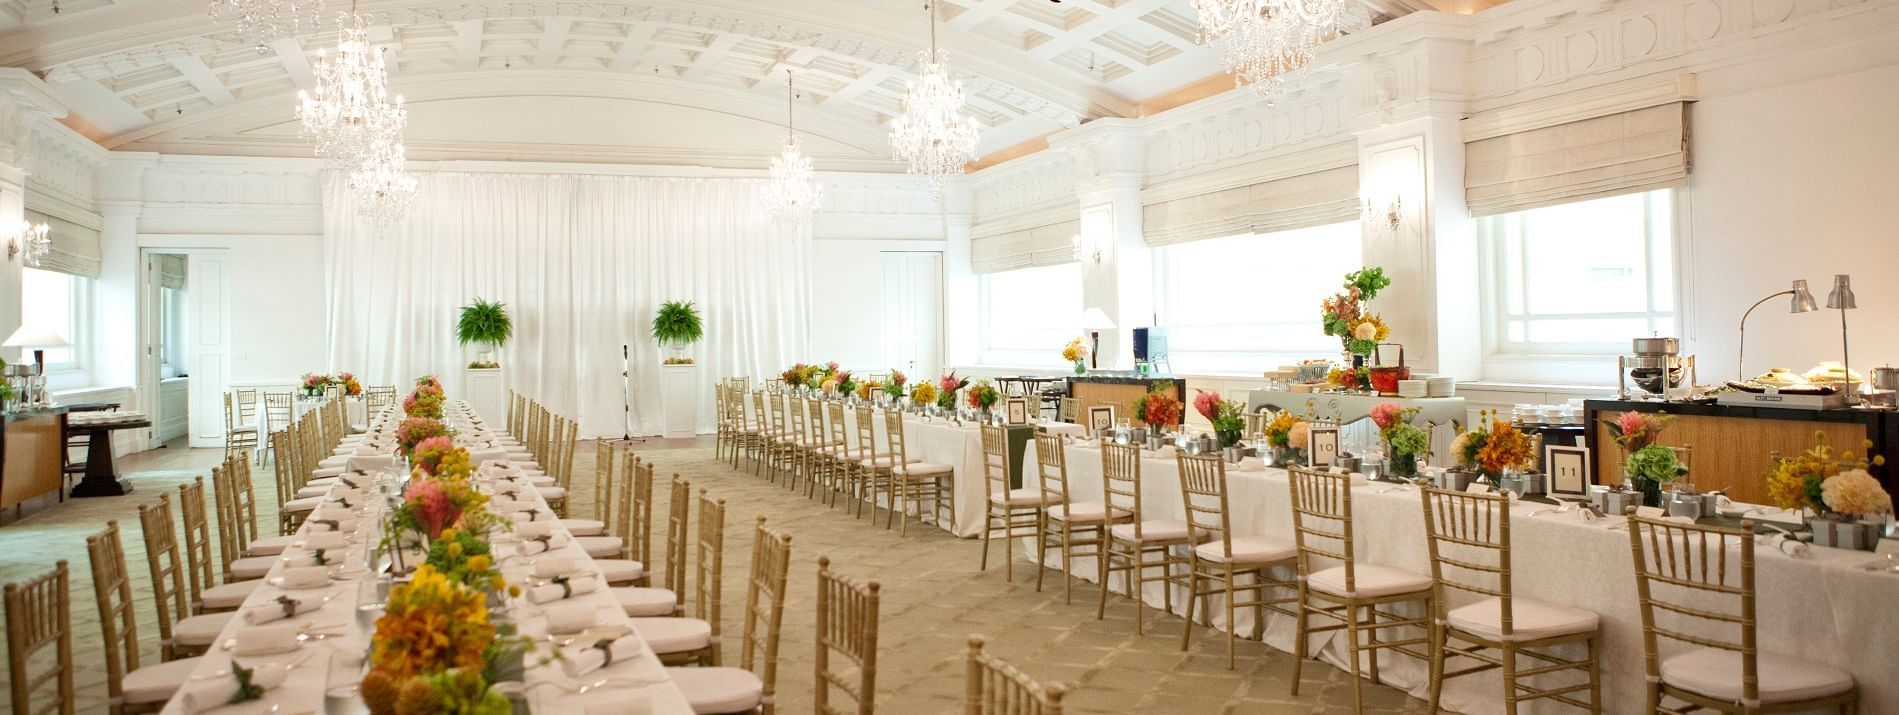 The arranged Ballroom with white tables at Fullerton Hotels